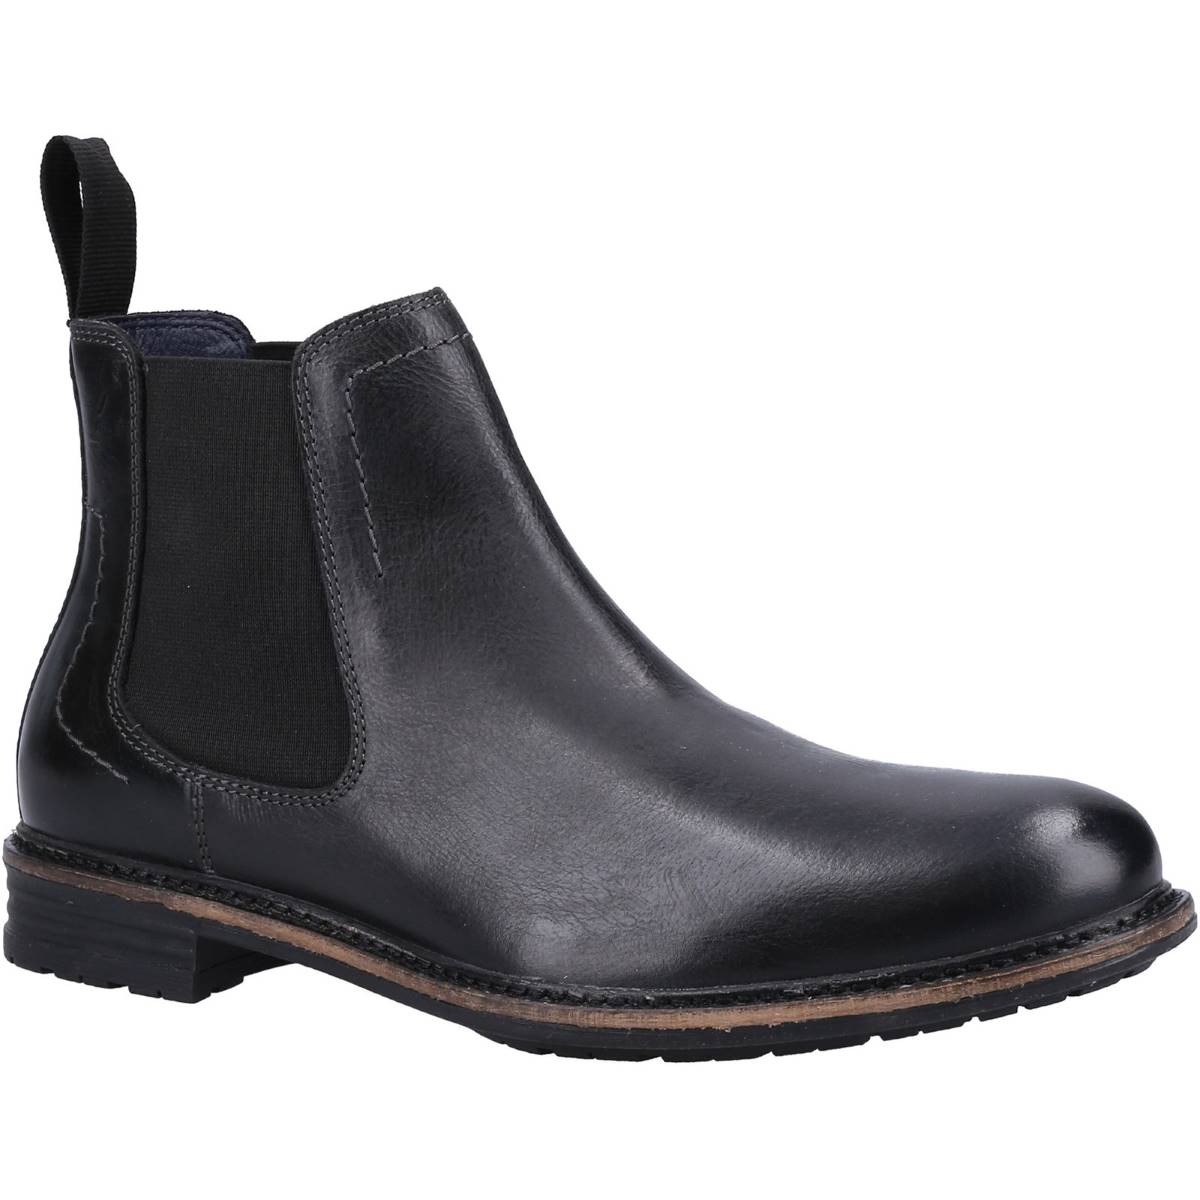 Hush Puppies Justin Chelsea Black Mens boots HP-35651-70616 in a Plain Leather in Size 9